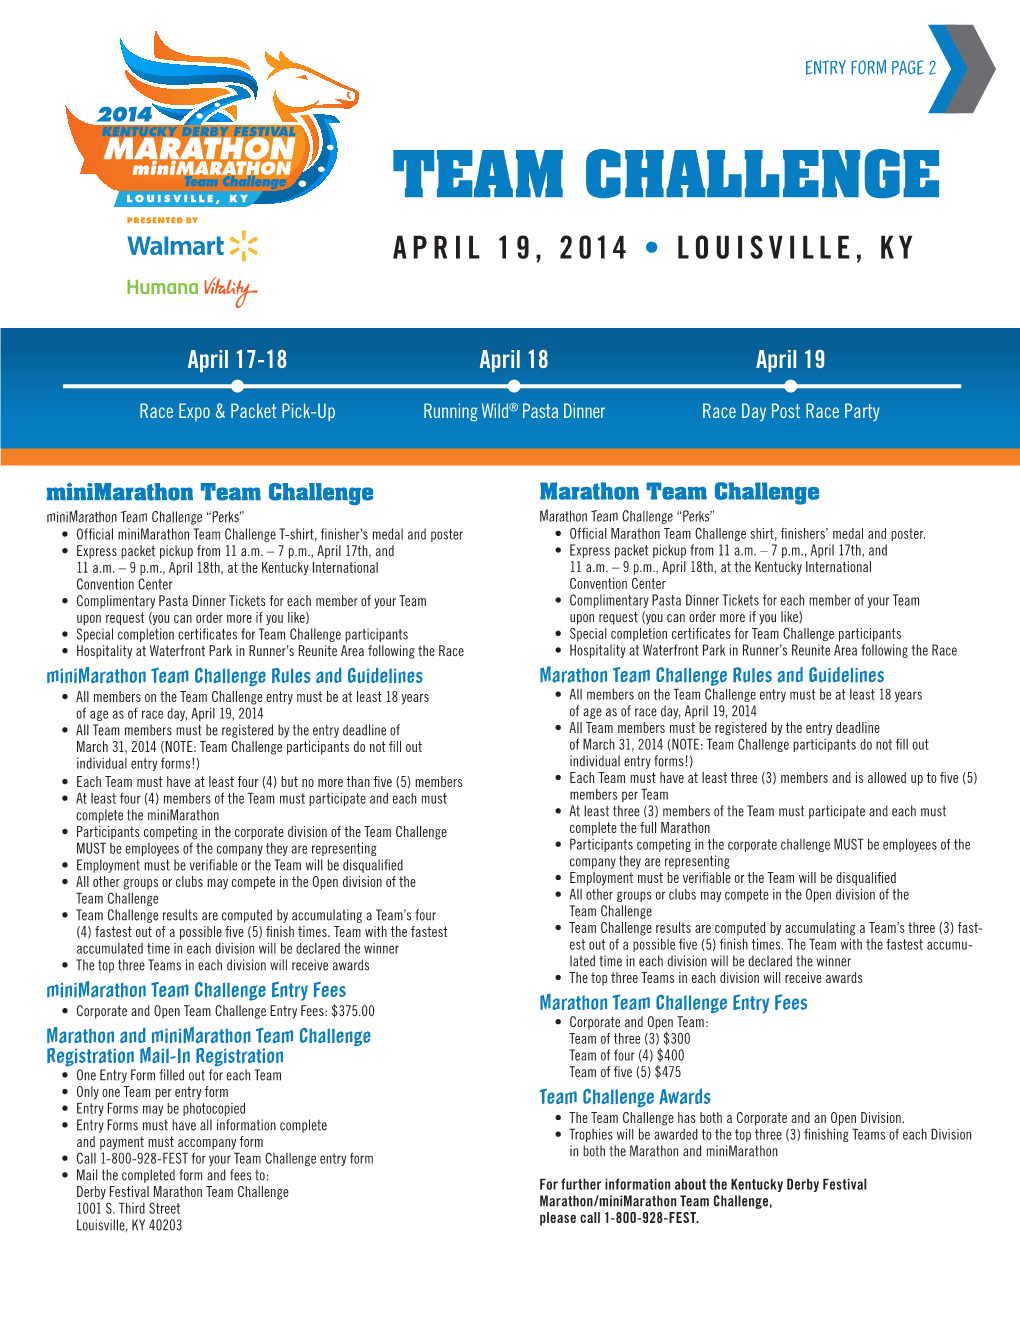 Team Challenge Presented by April 19, 2014 • Louisville, Ky